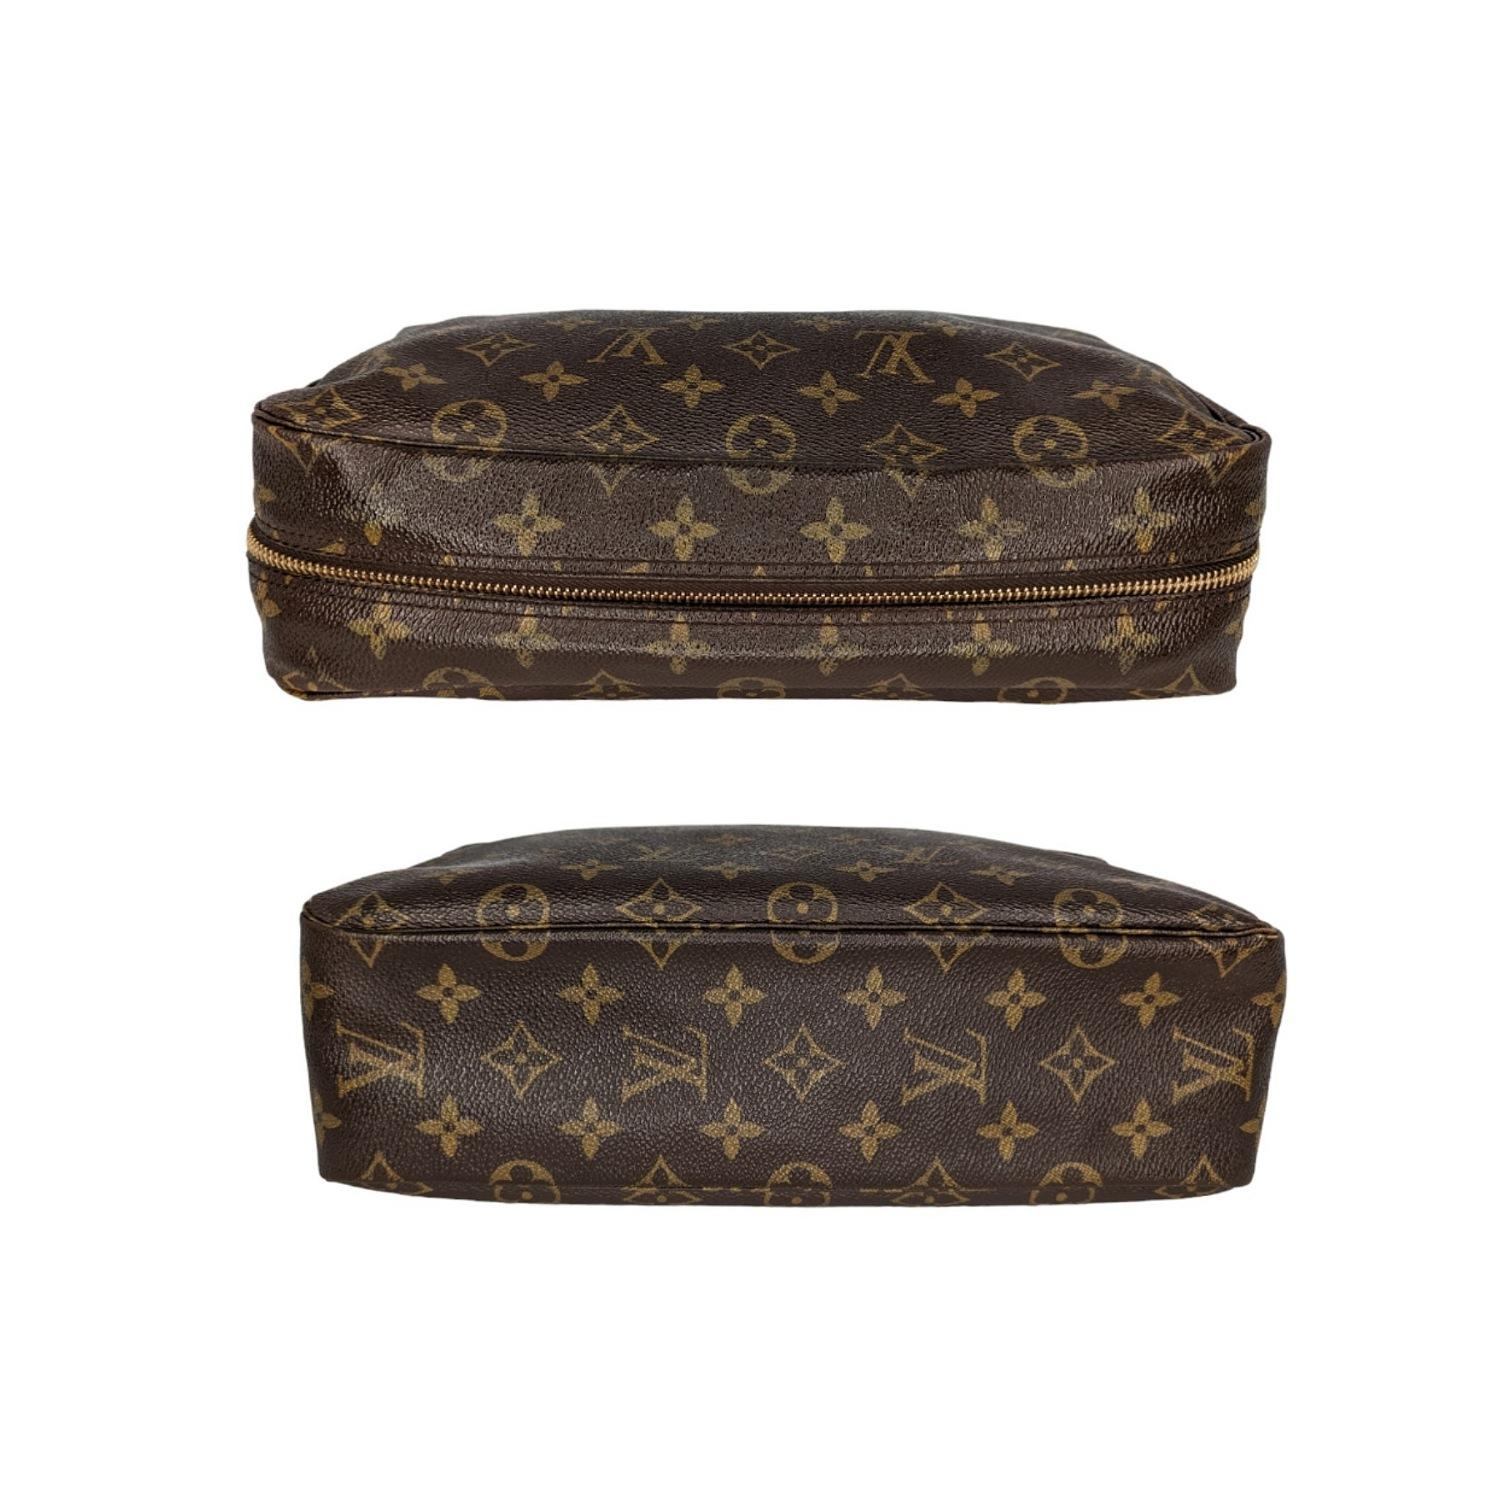 Louis Vuitton 1988 Monogram Trousse Toiletry Cosmetic Case In Good Condition For Sale In Scottsdale, AZ